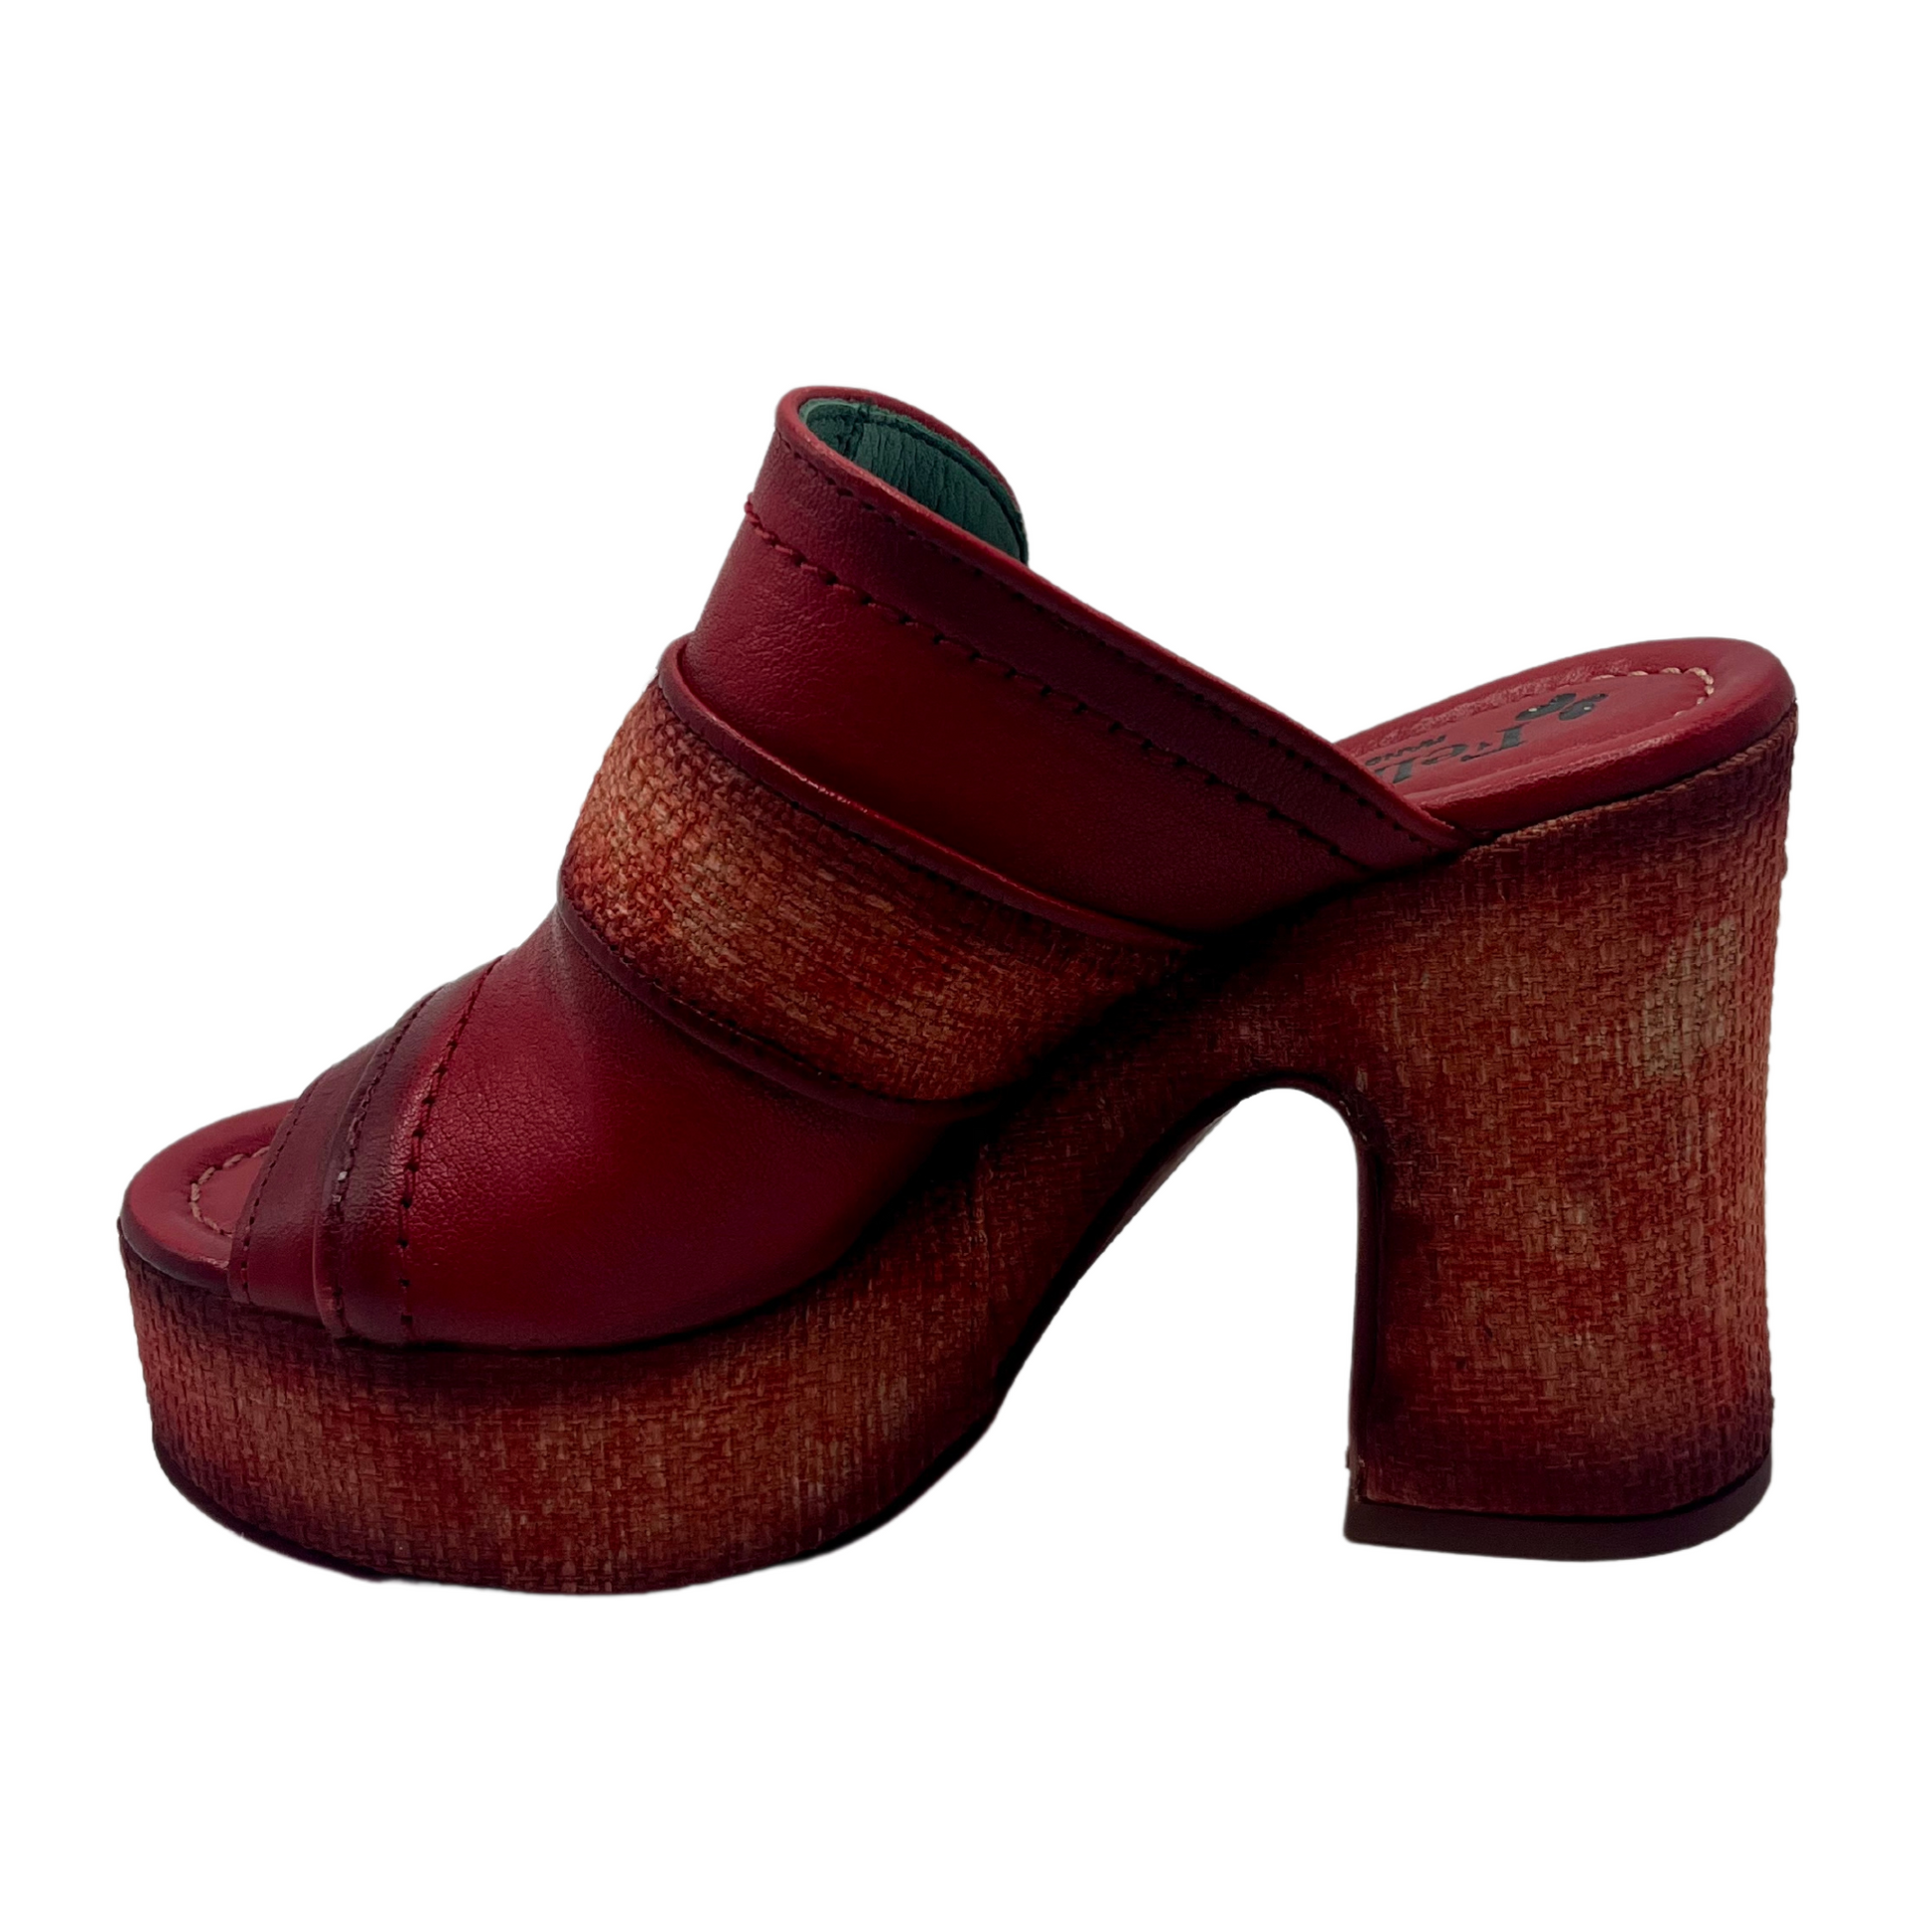 Left facing view of red leather shoe with chunky 4" heel and platform toe.